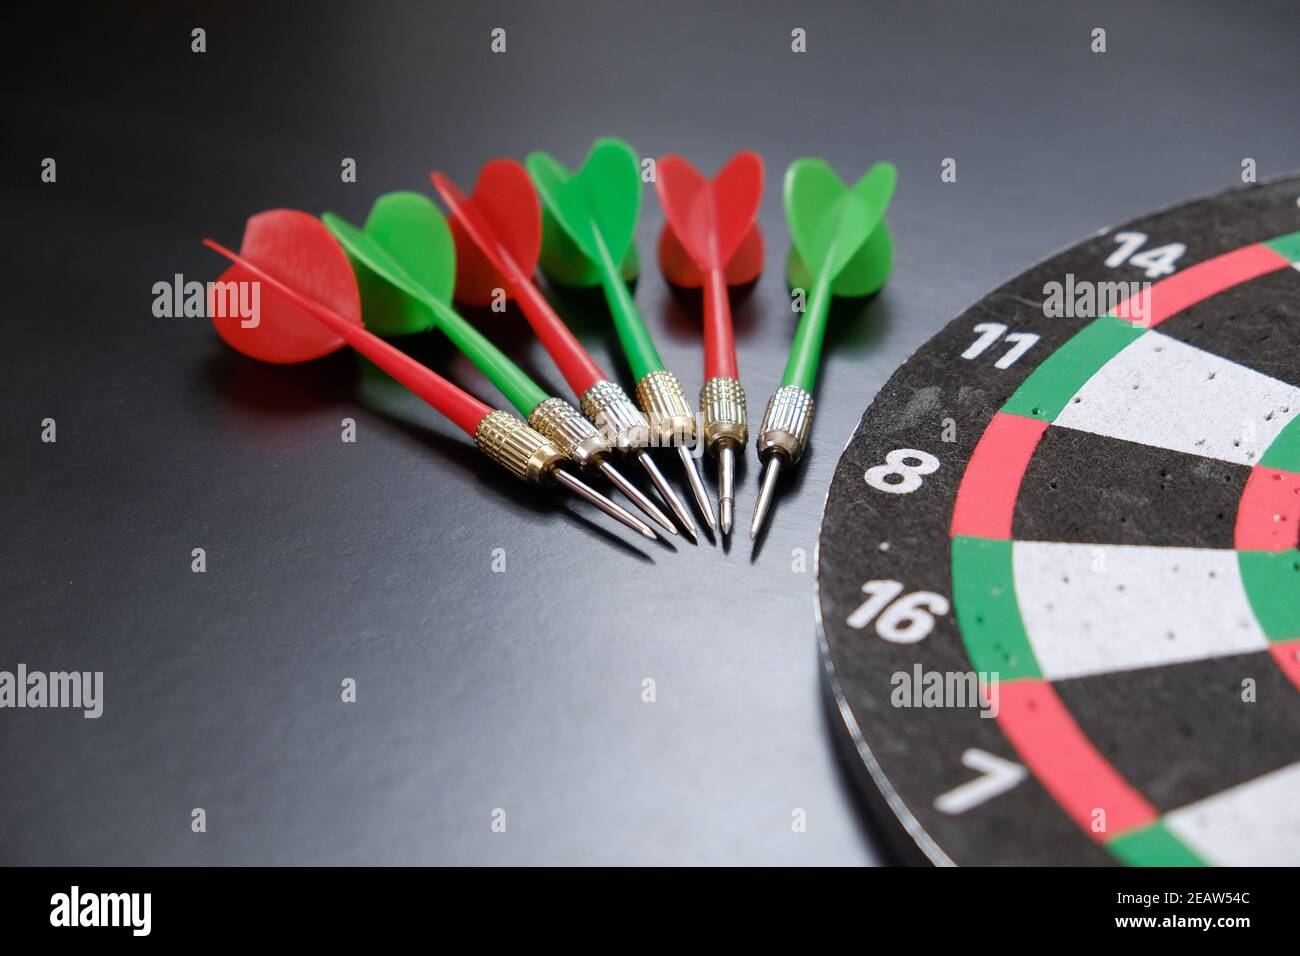 dartboard and red, green and yellow darts on a black background Stock Photo